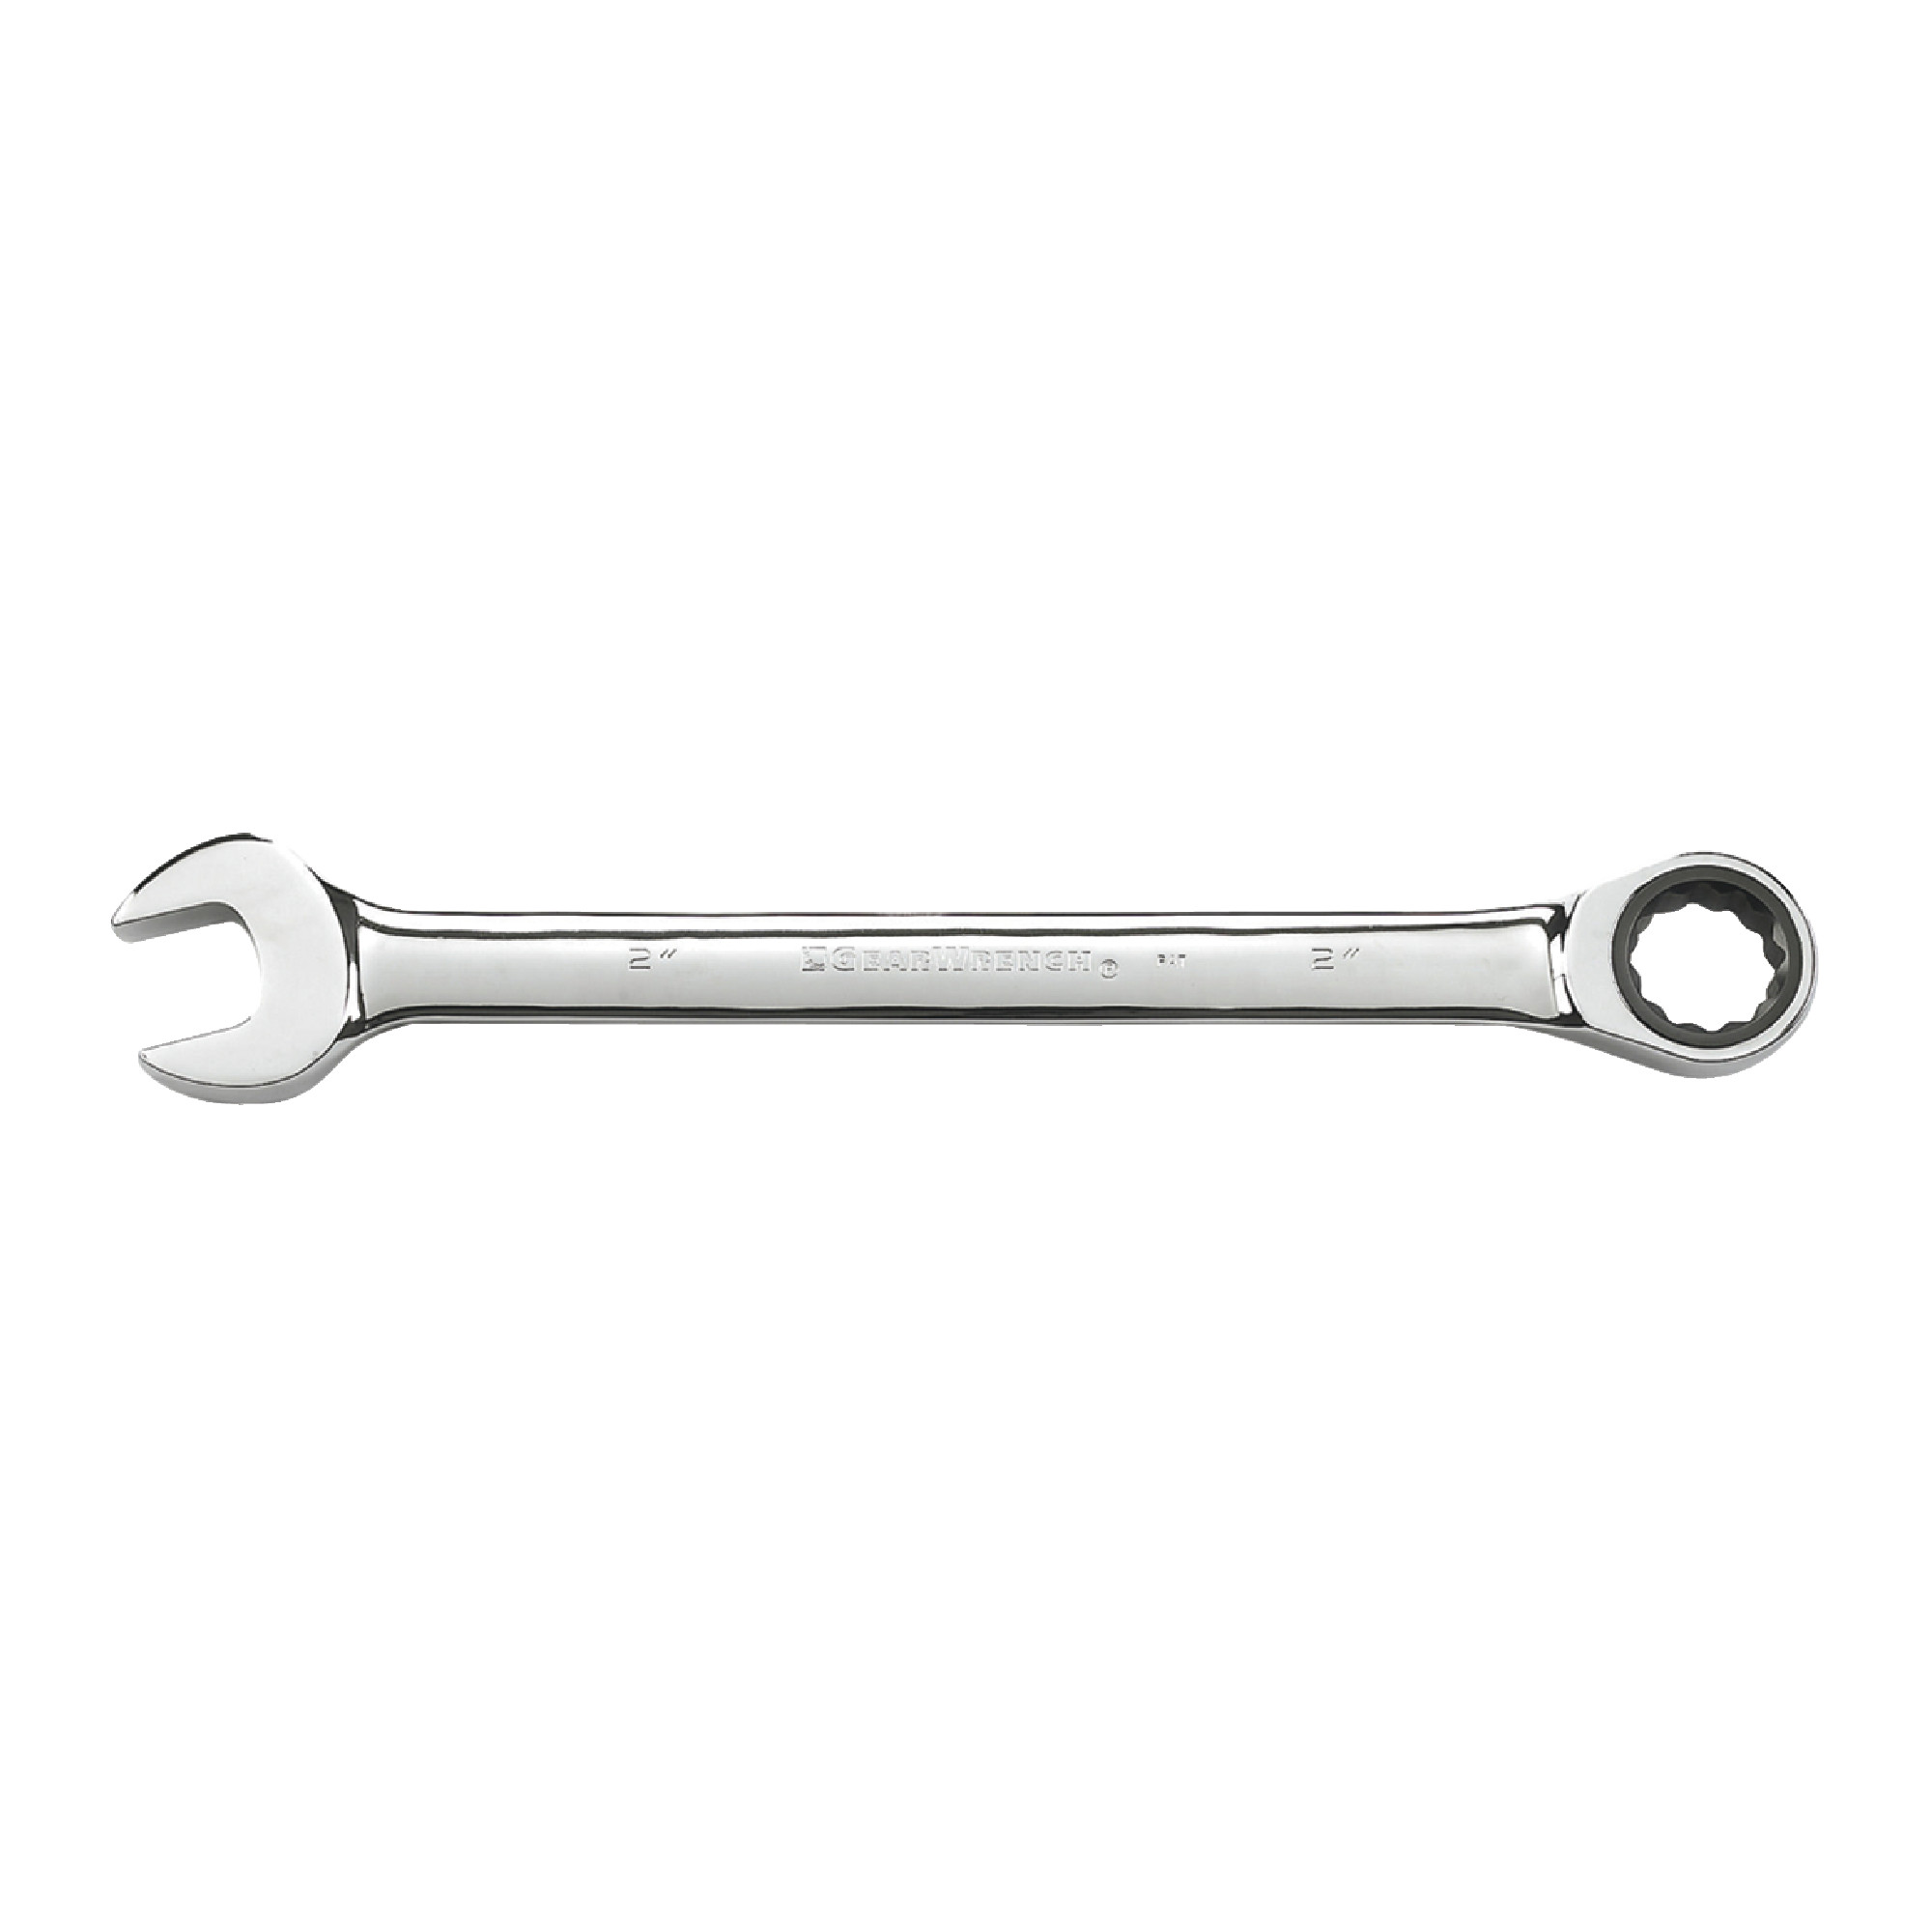 1-1/4" 12 Point Ratcheting Combination Wrench